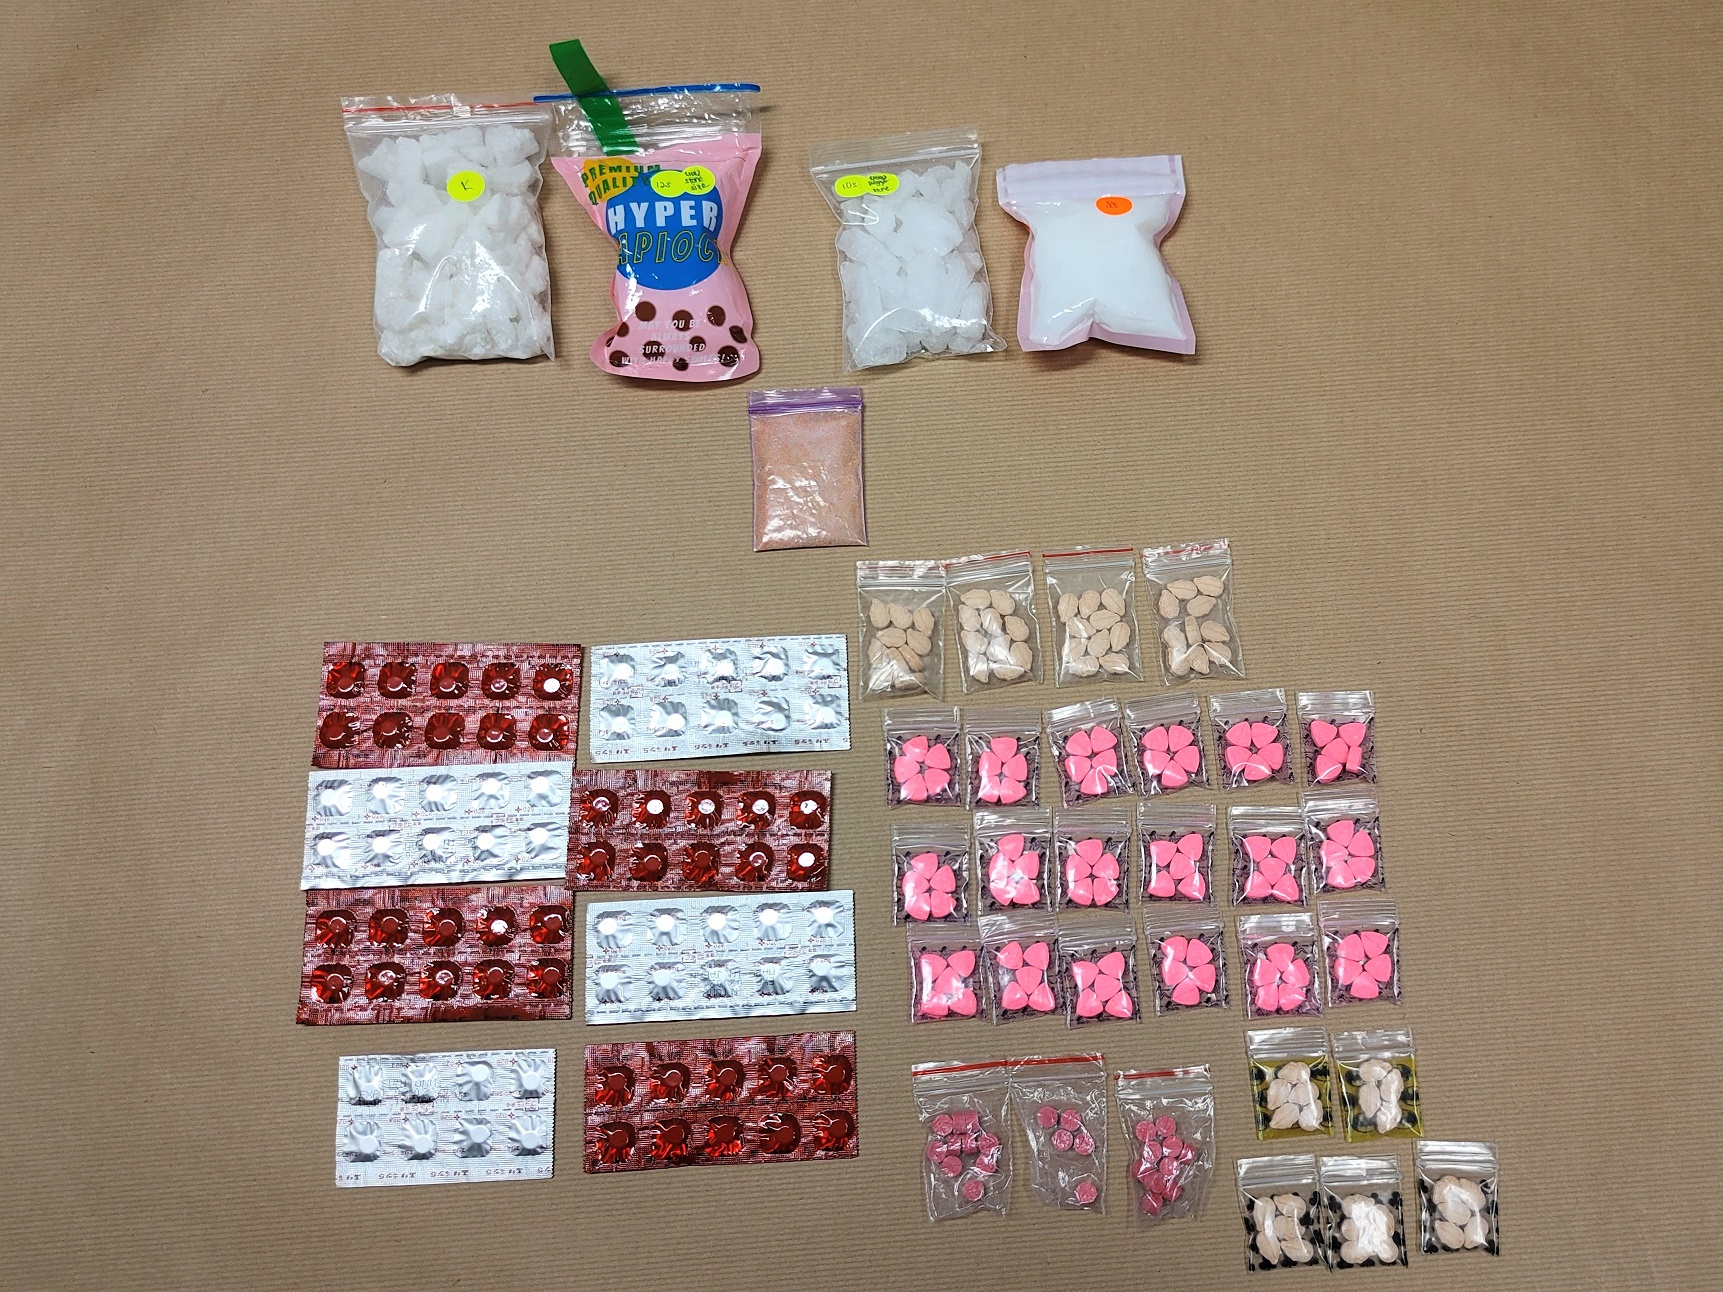 Photo 1 (CNB) : Some of the drugs recovered from a unit in the vicinity of Eng Hoon Street on 14 September 2020